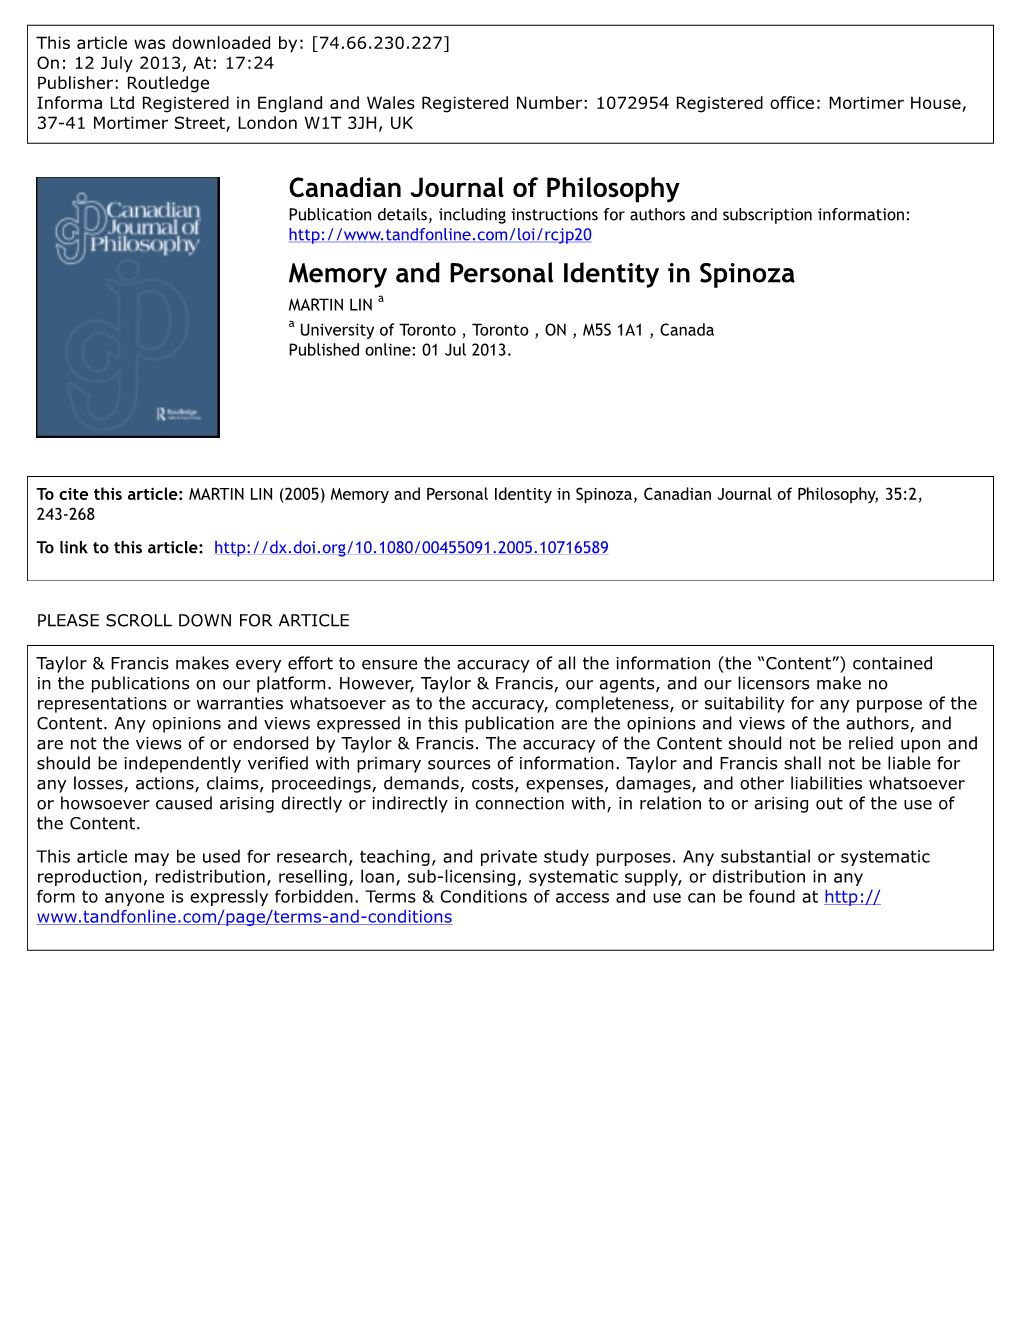 Memory and Personal Identity in Spinoza MARTIN LIN a a University of Toronto , Toronto , on , M5S 1A1 , Canada Published Online: 01 Jul 2013